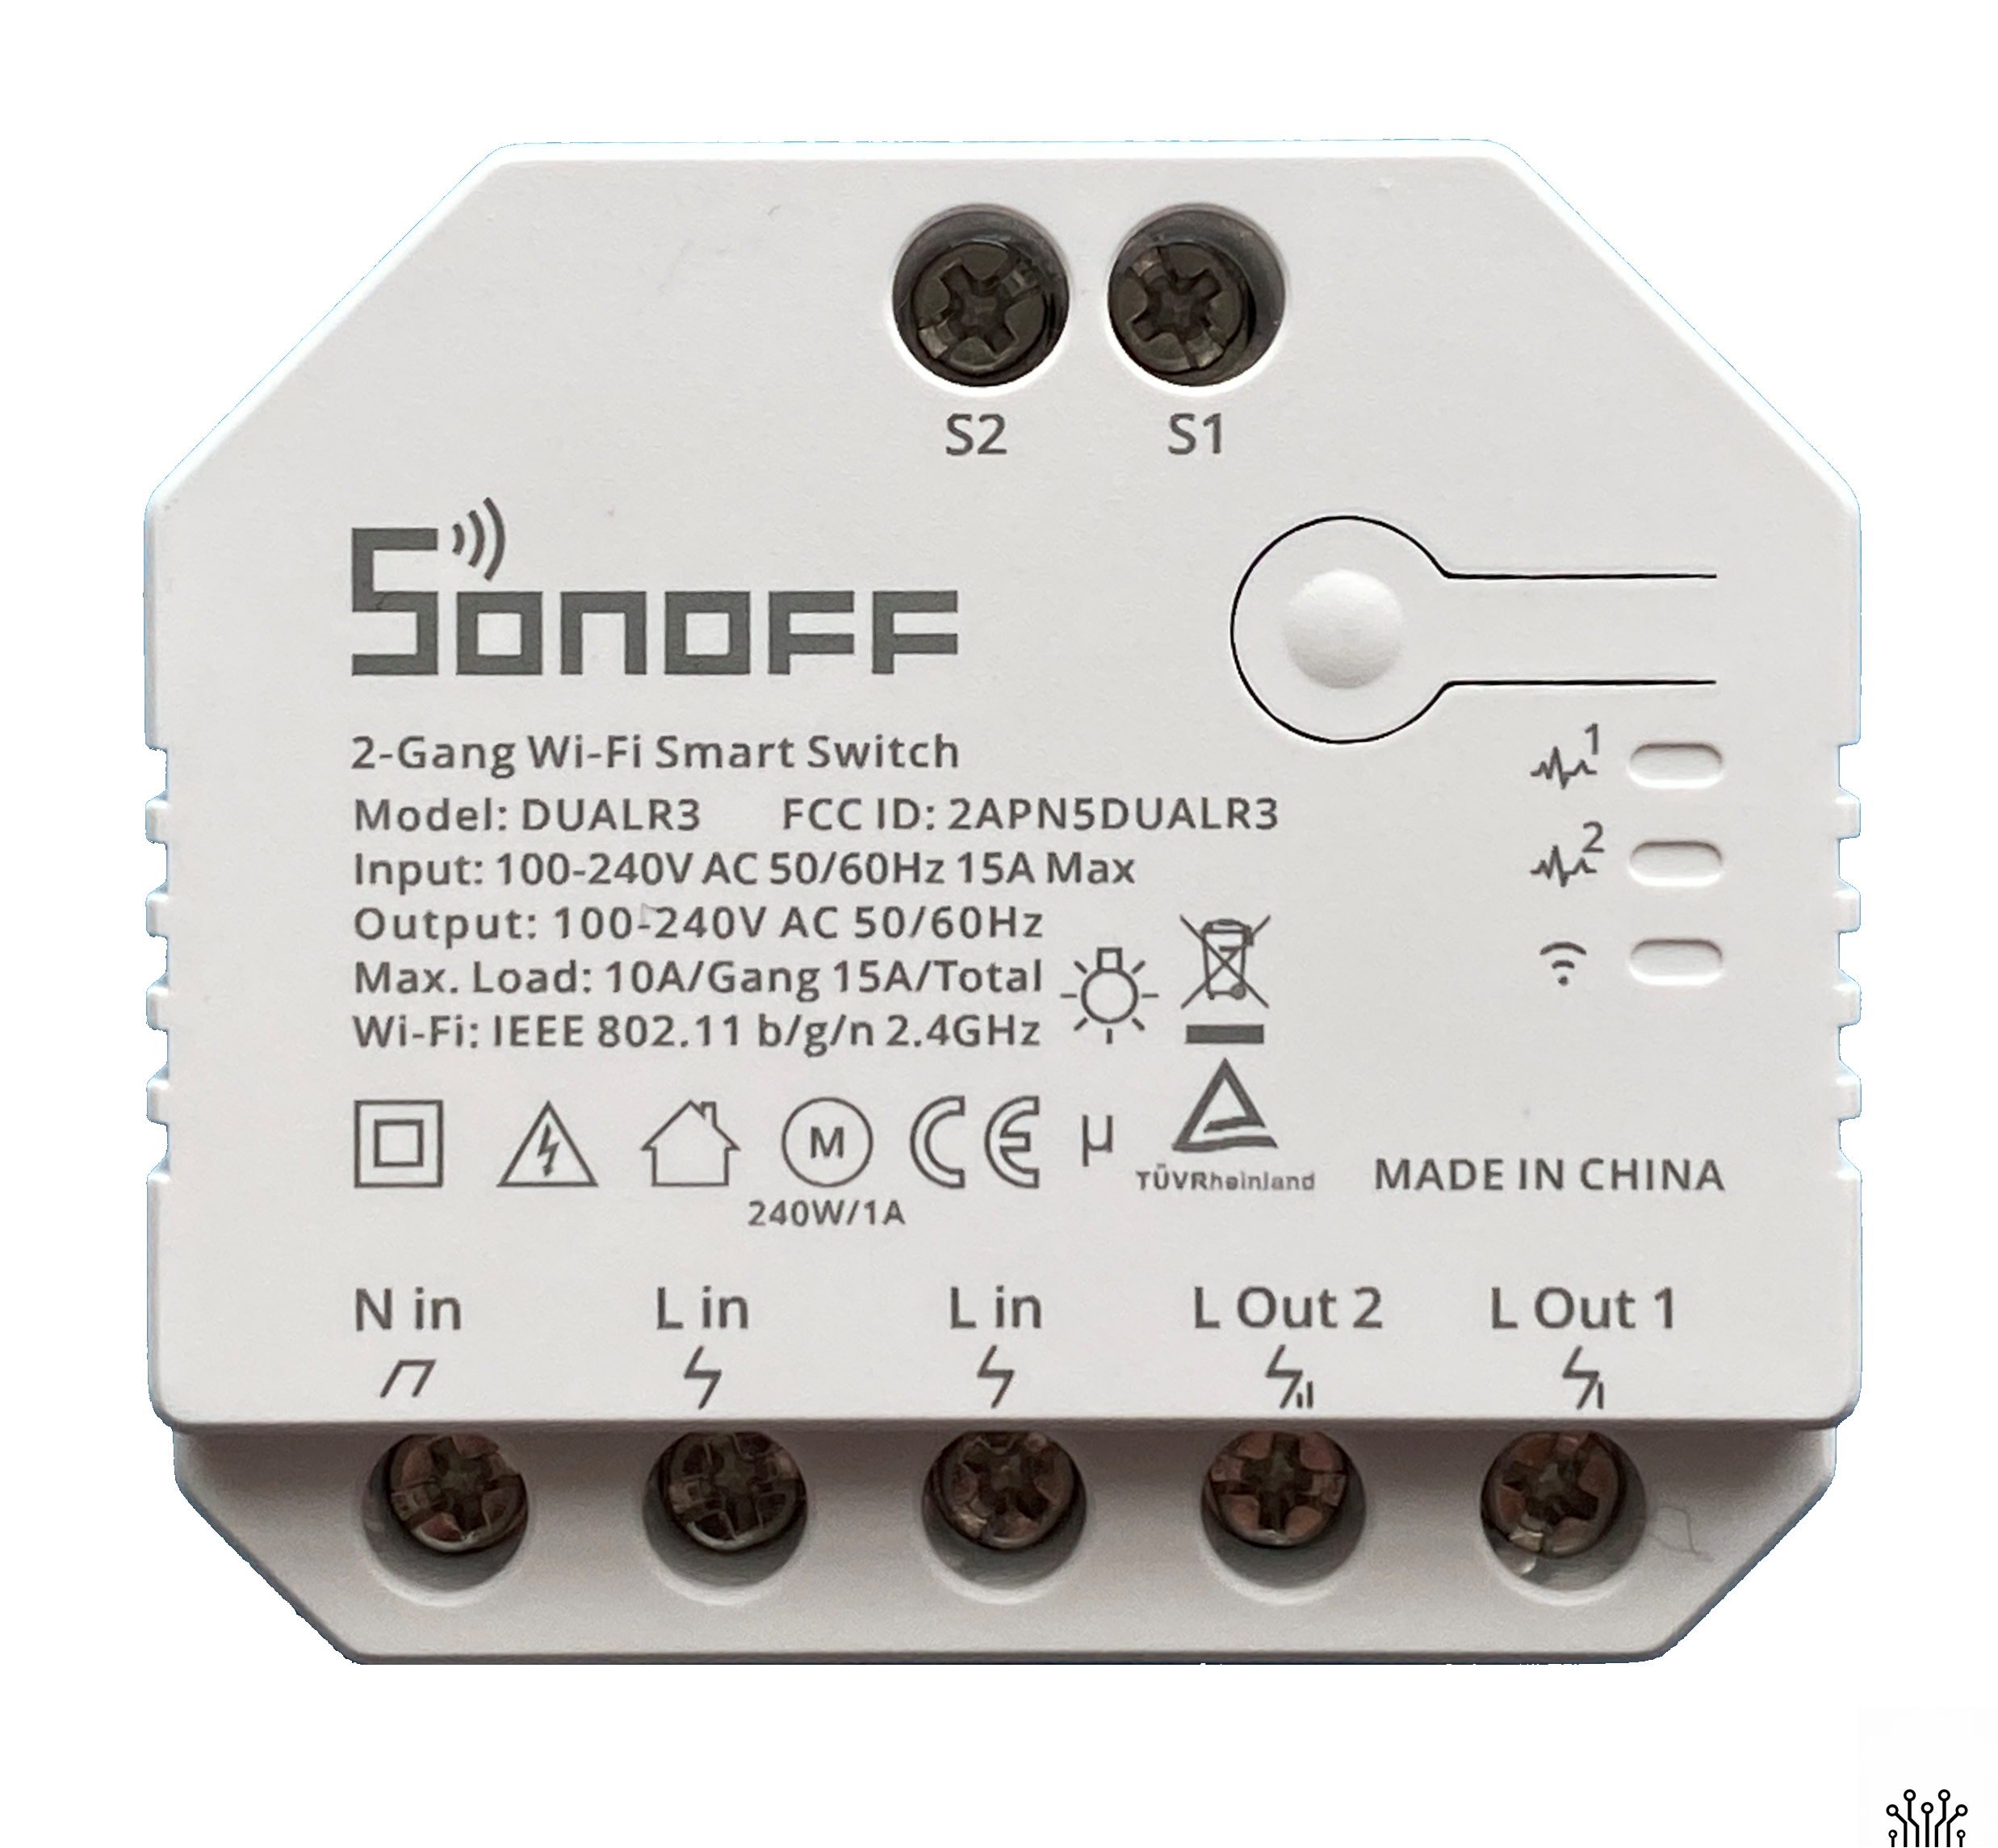 Power metering for the Sonoff Dual R3 r1.6 using esphome